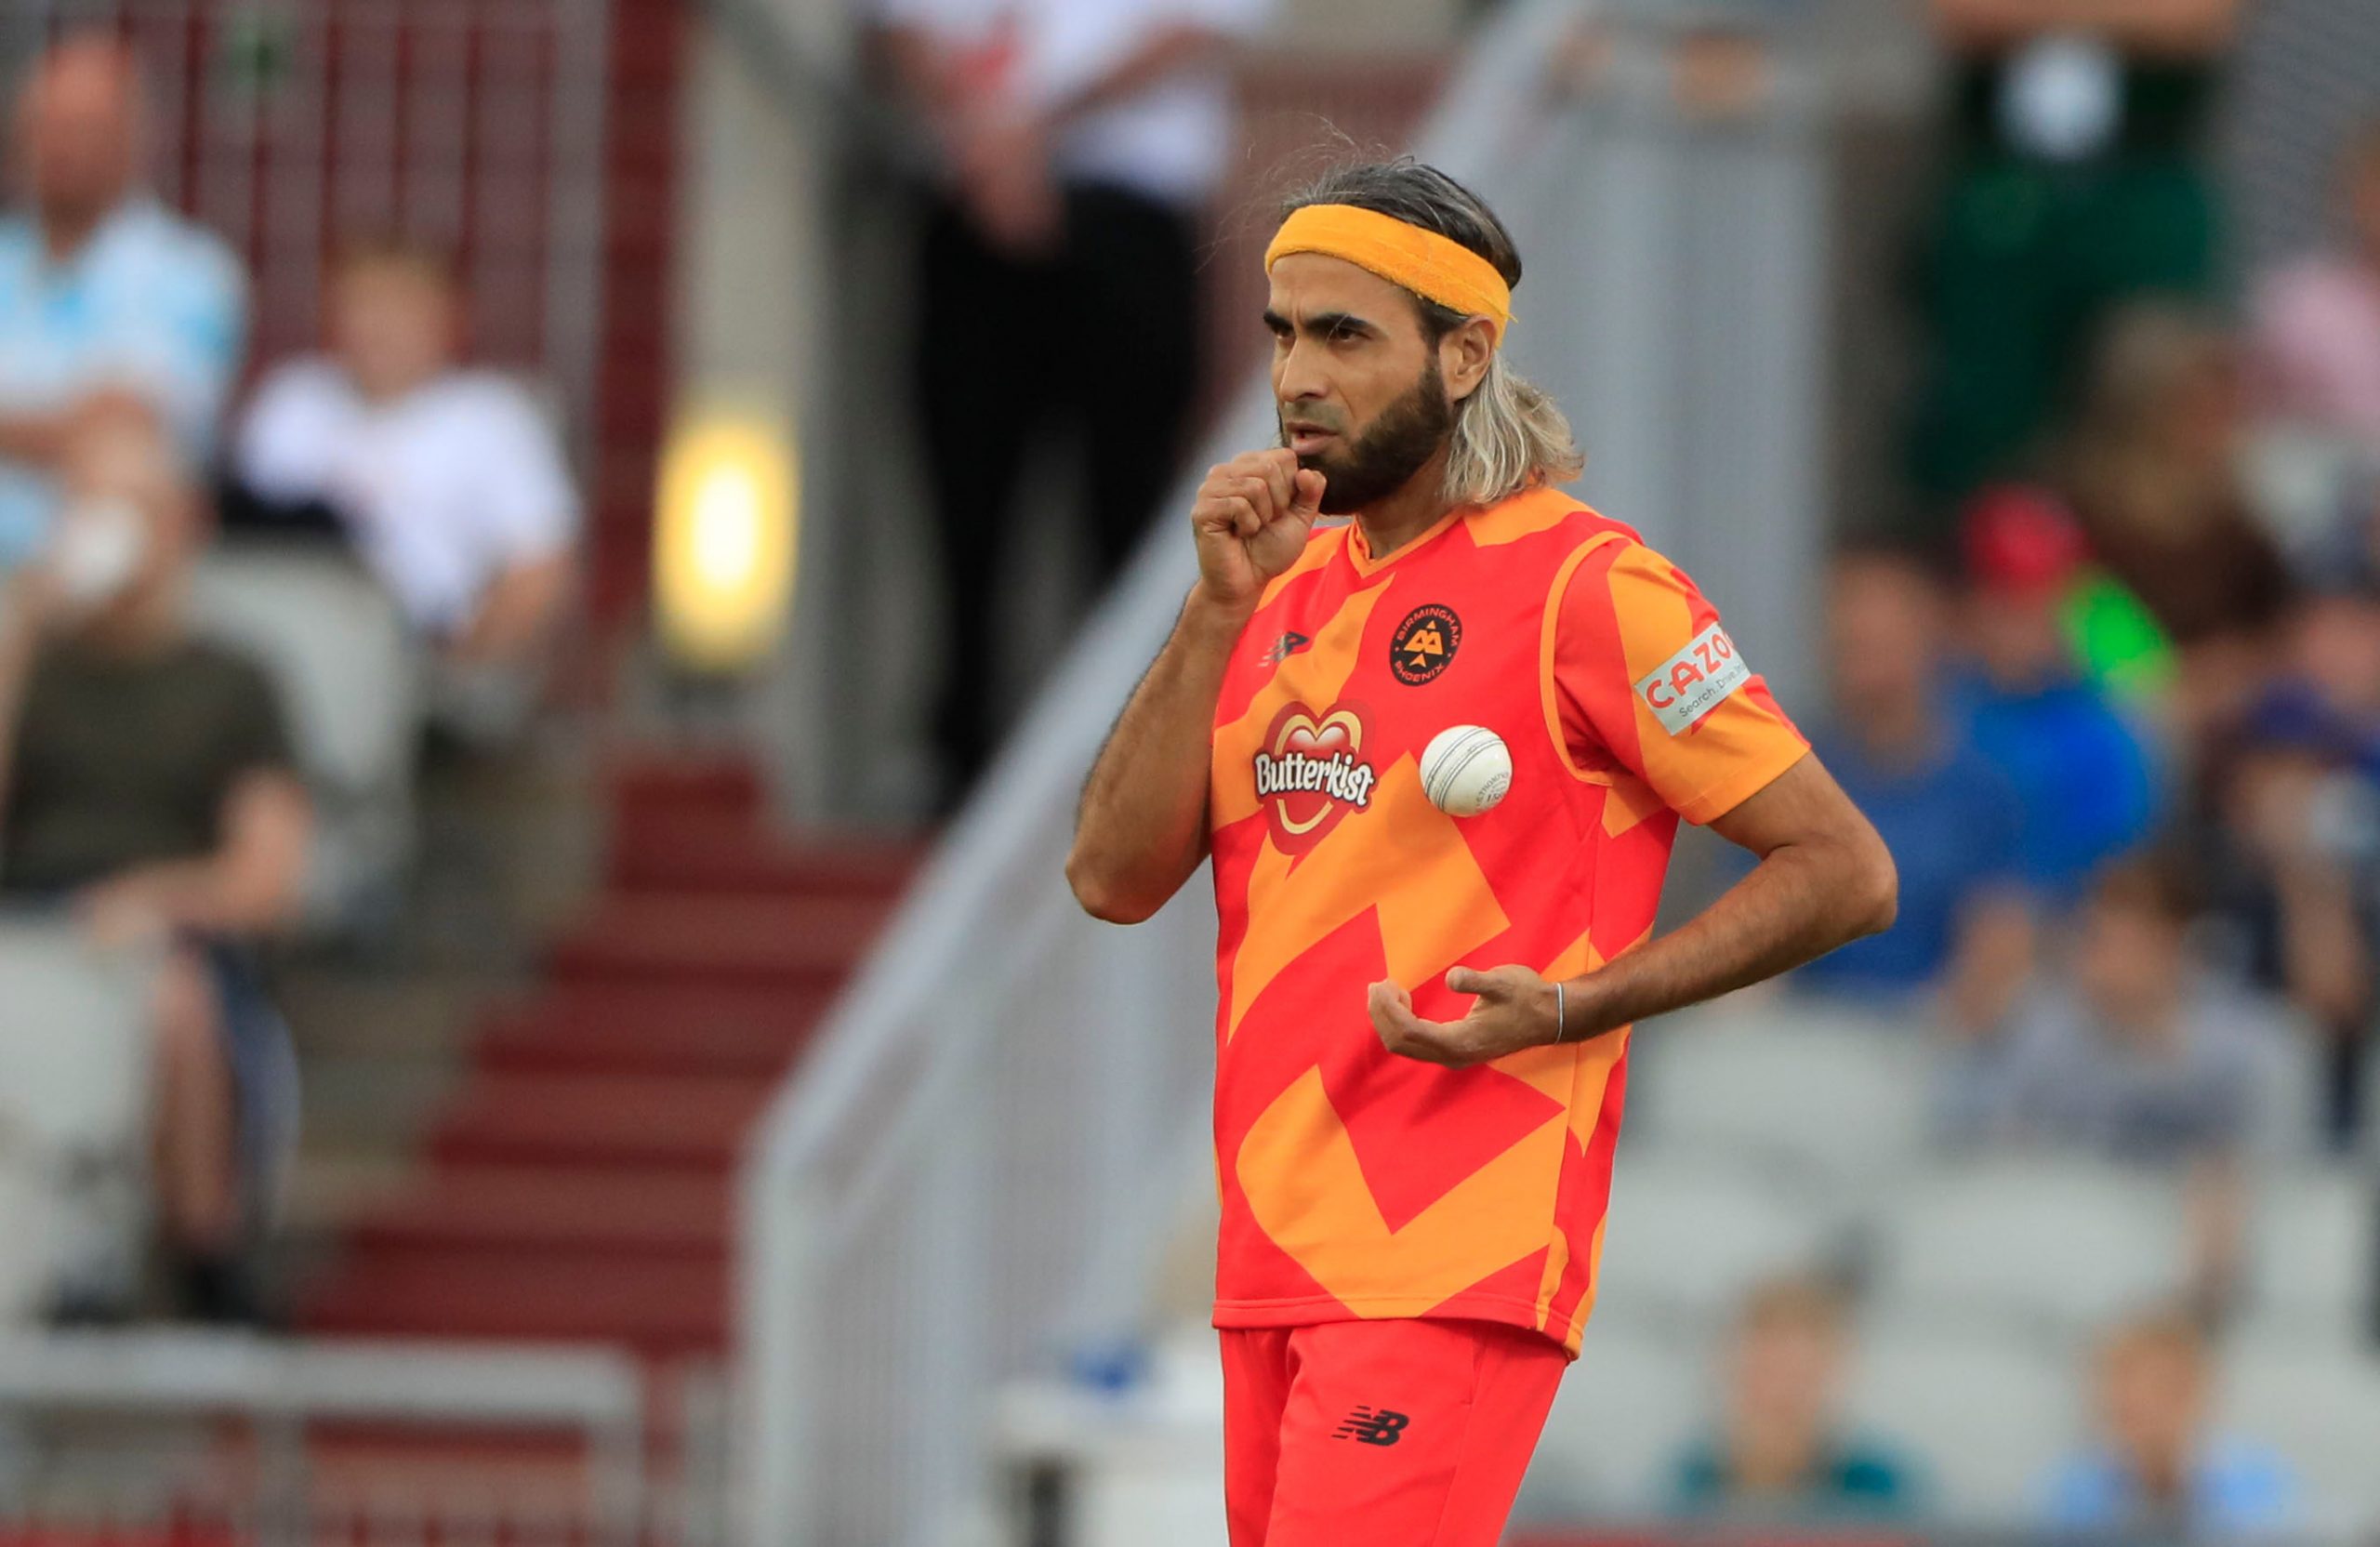 Watch: Imran Tahir smashes 5 sixes for World Giants in Legends League Cricket